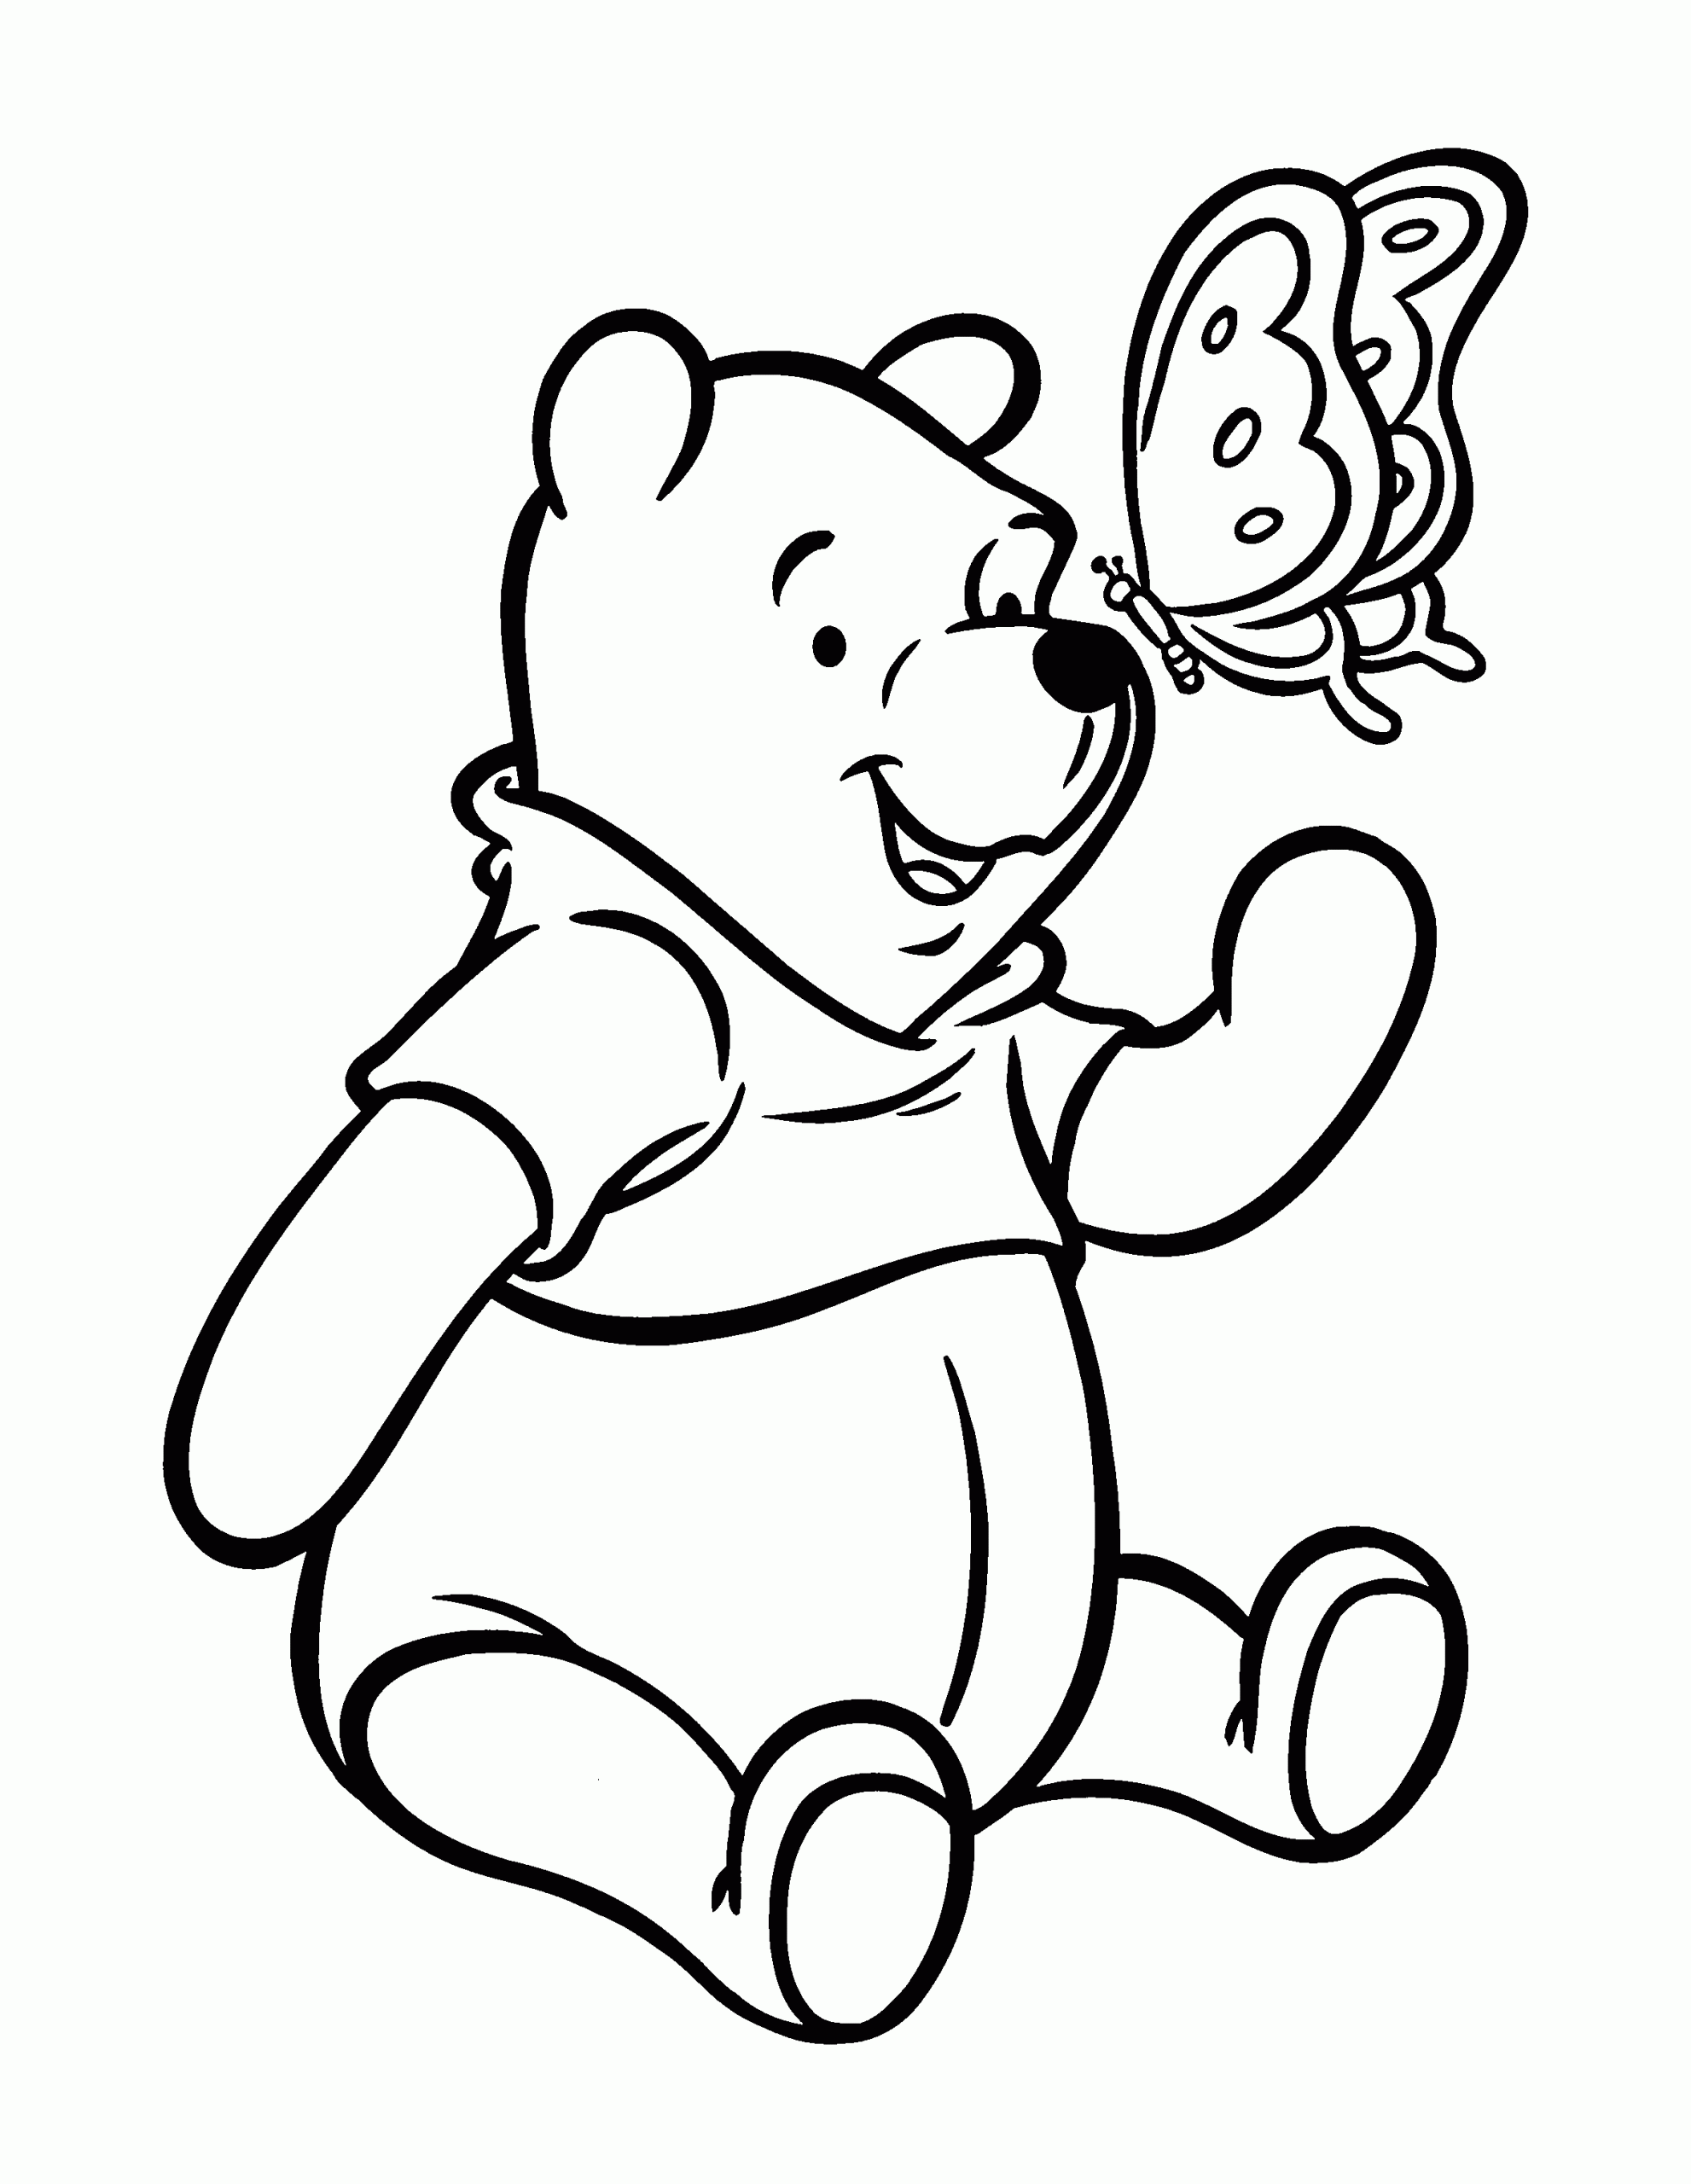 Pooh With Butterfly Coloring Page - Free Printable Coloring Pages for Kids